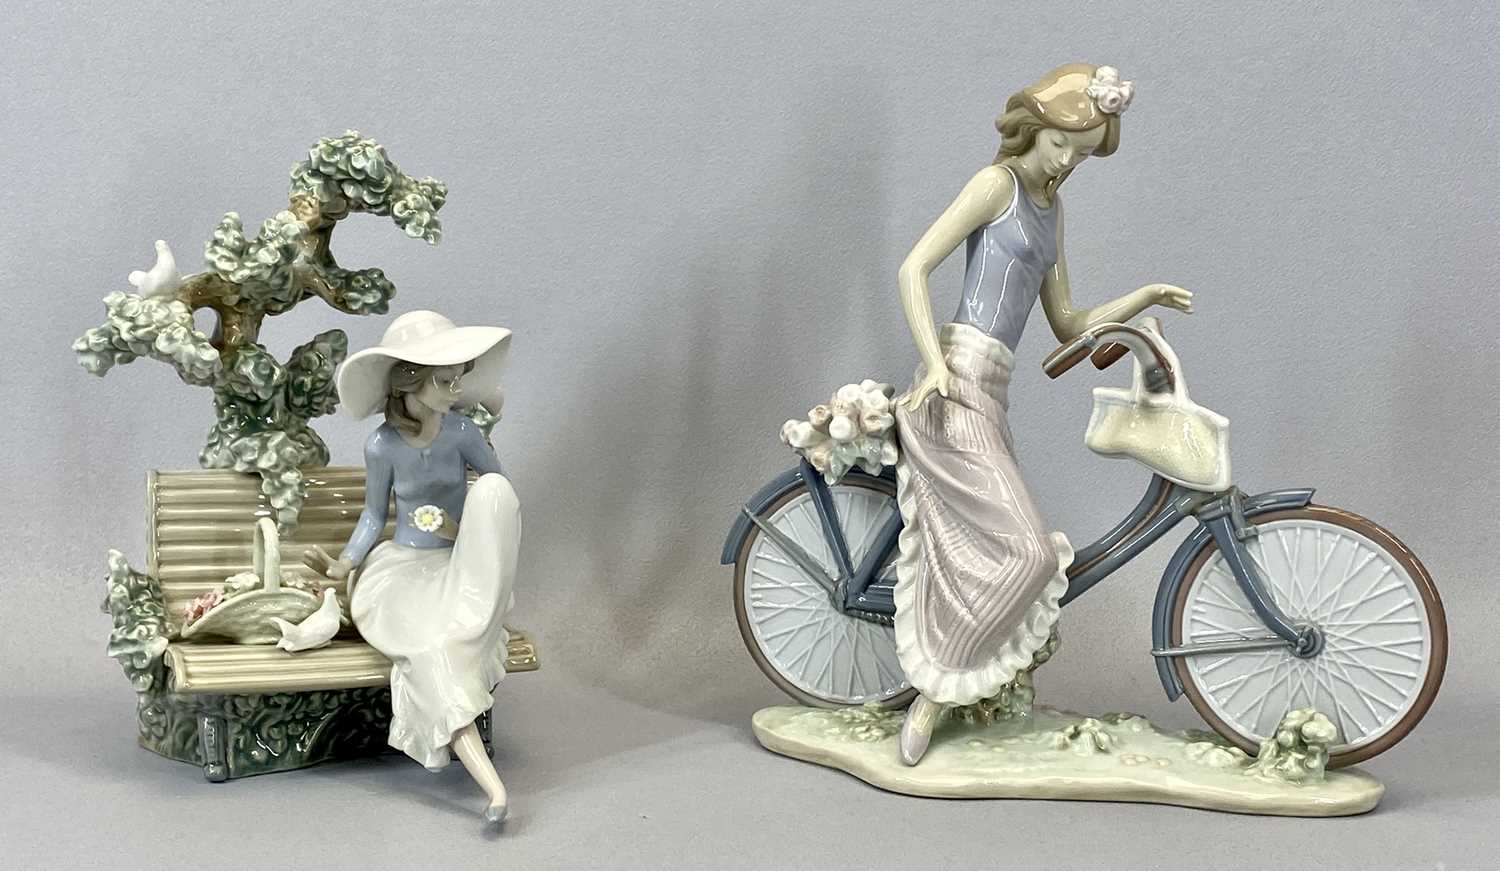 SIX LLADRO FIGURINES, girl on bicycle, 26cms H, ballet dancers, 24cms H, girl seated on bench, 23cms - Image 2 of 4